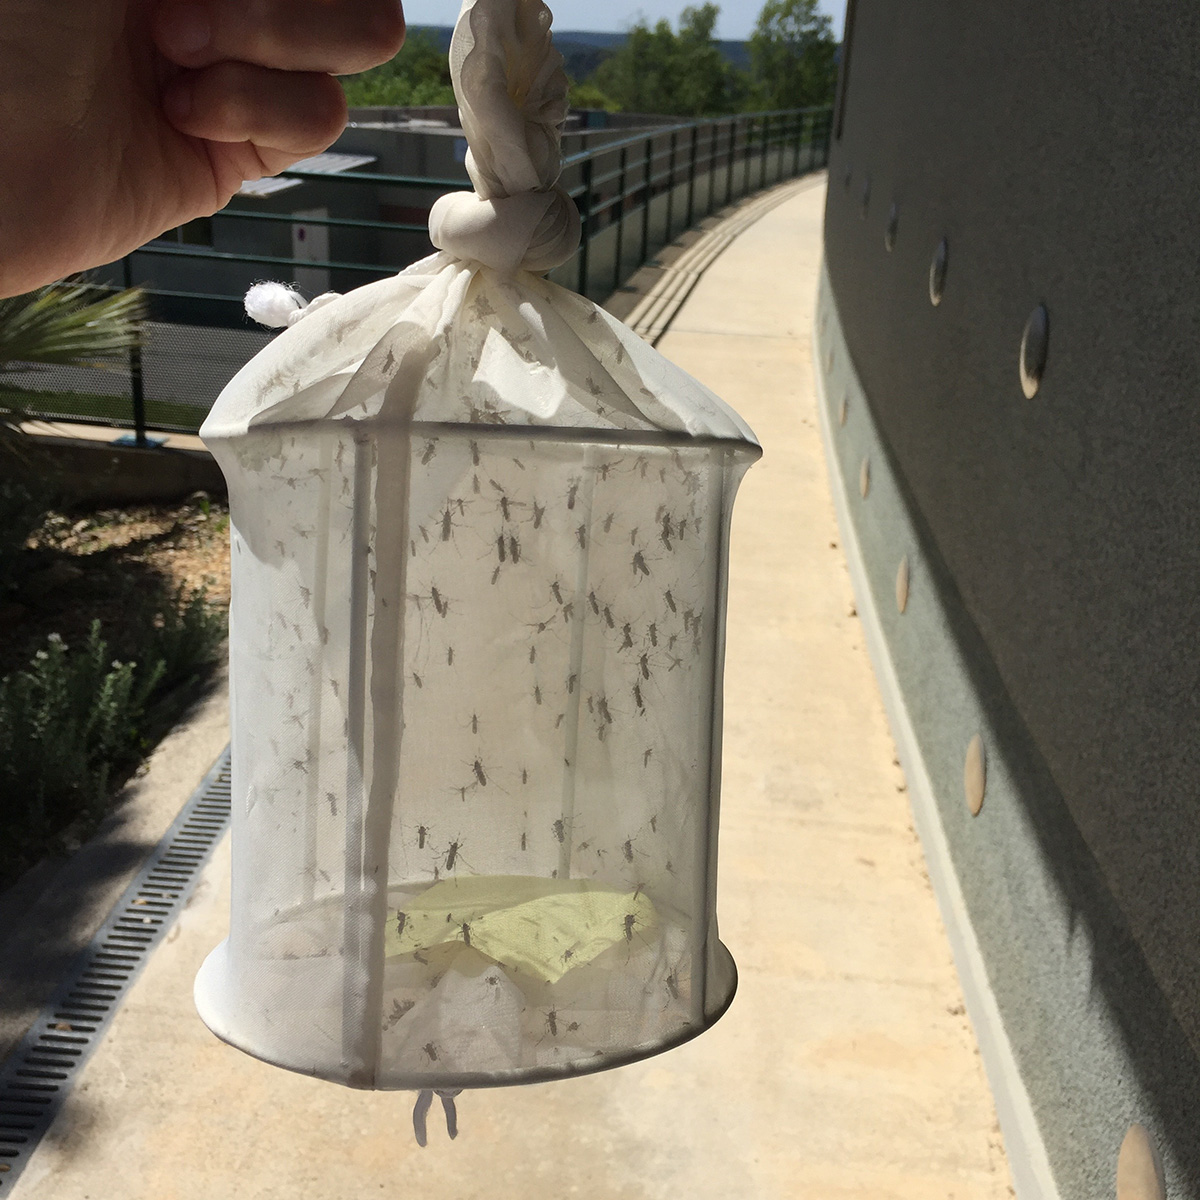 A trap of Culex pipiens mosquitoes from France, provided by EID (Entente Interdépartementale Démoustication) in Montpellier, France. Credit: Julie Reveillaud